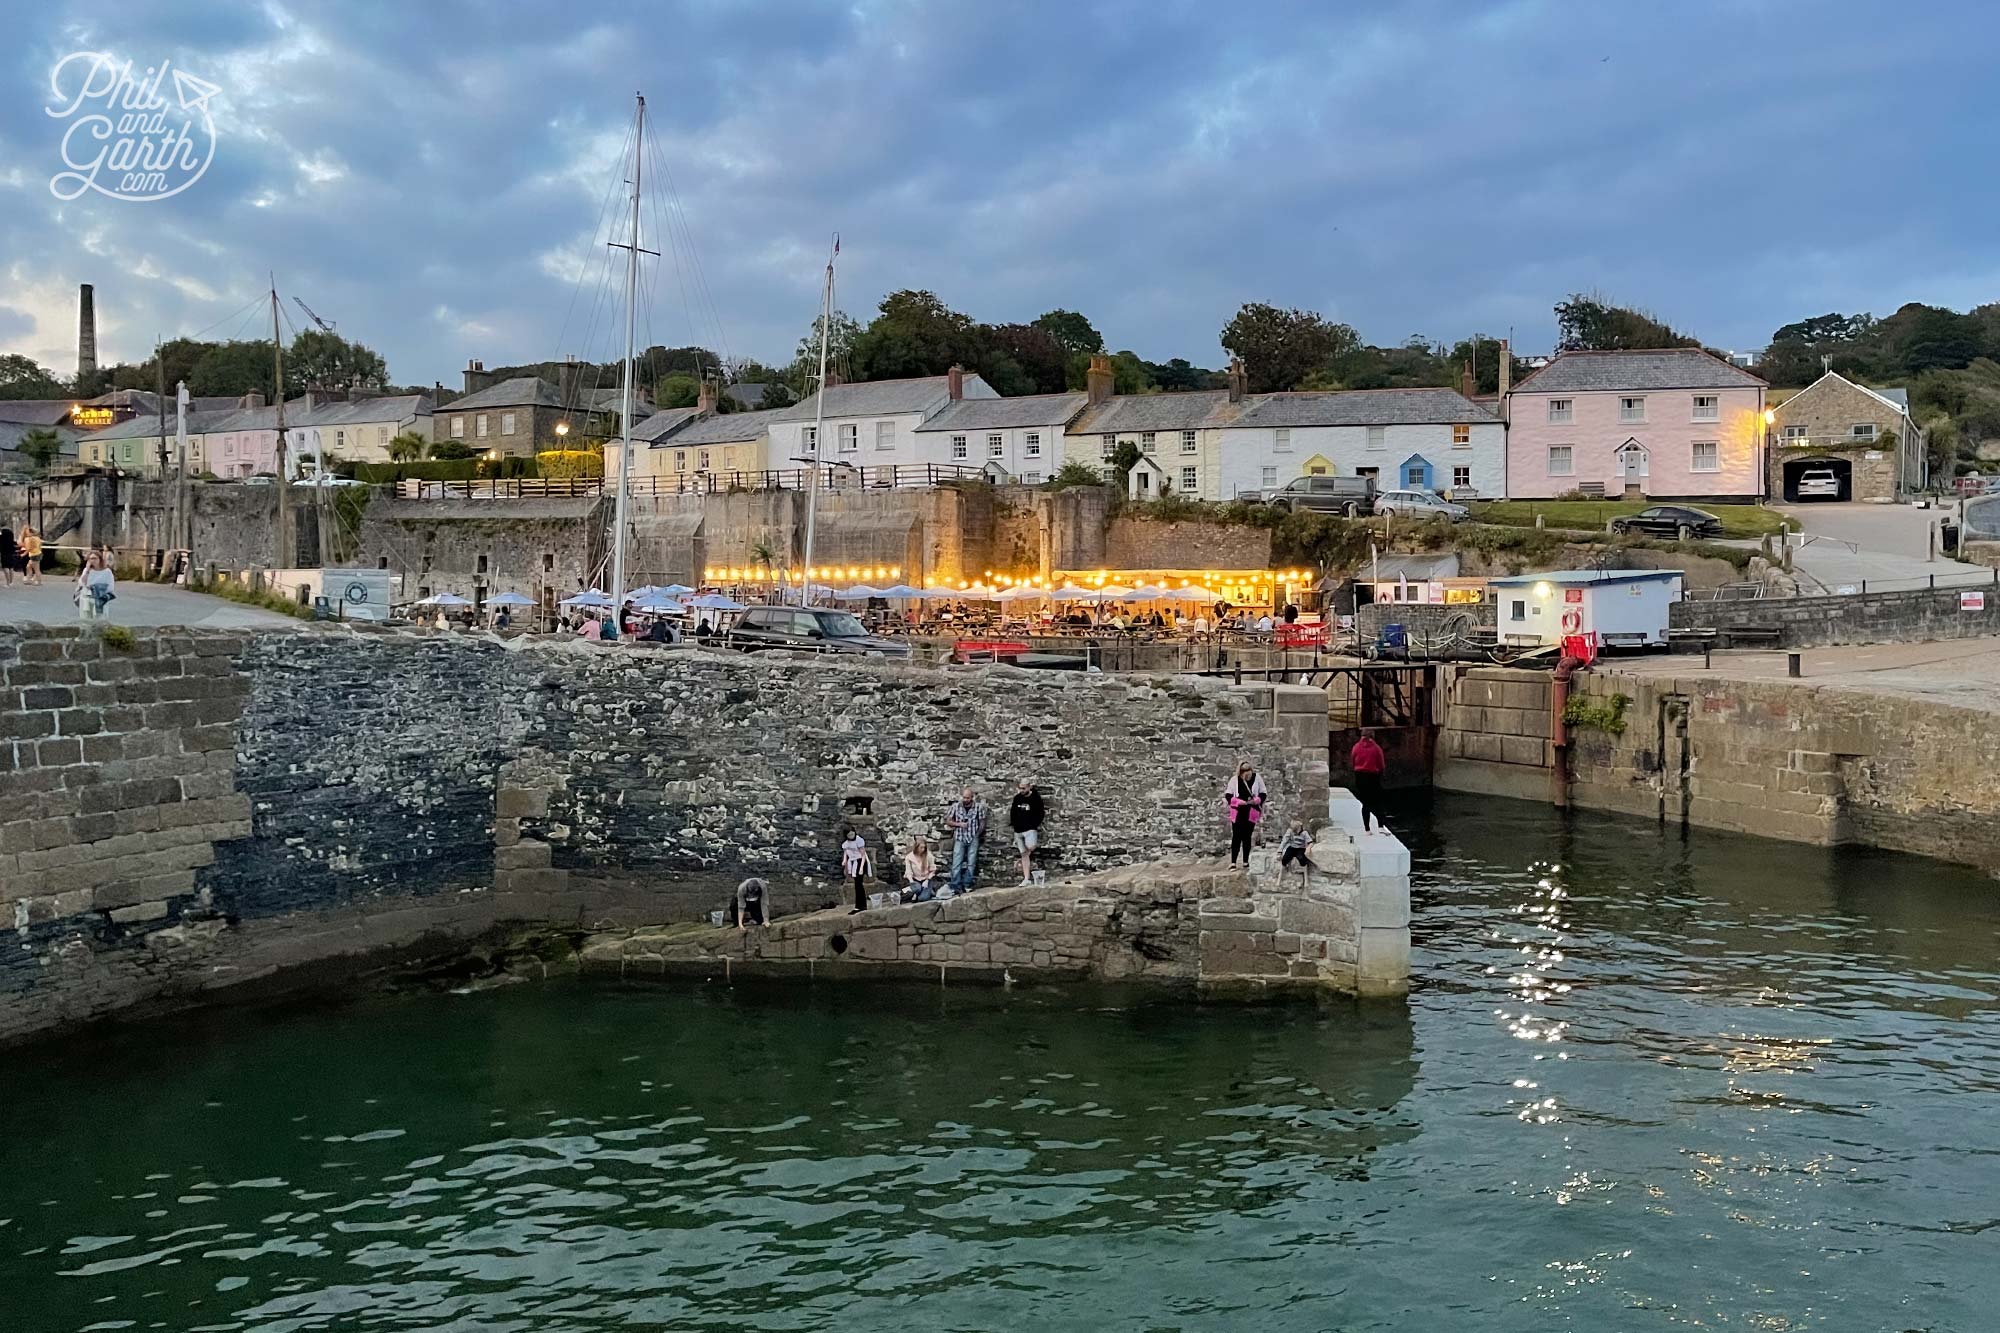 Charlestown is a pretty village and port. Made famous by the BBC's Poldark